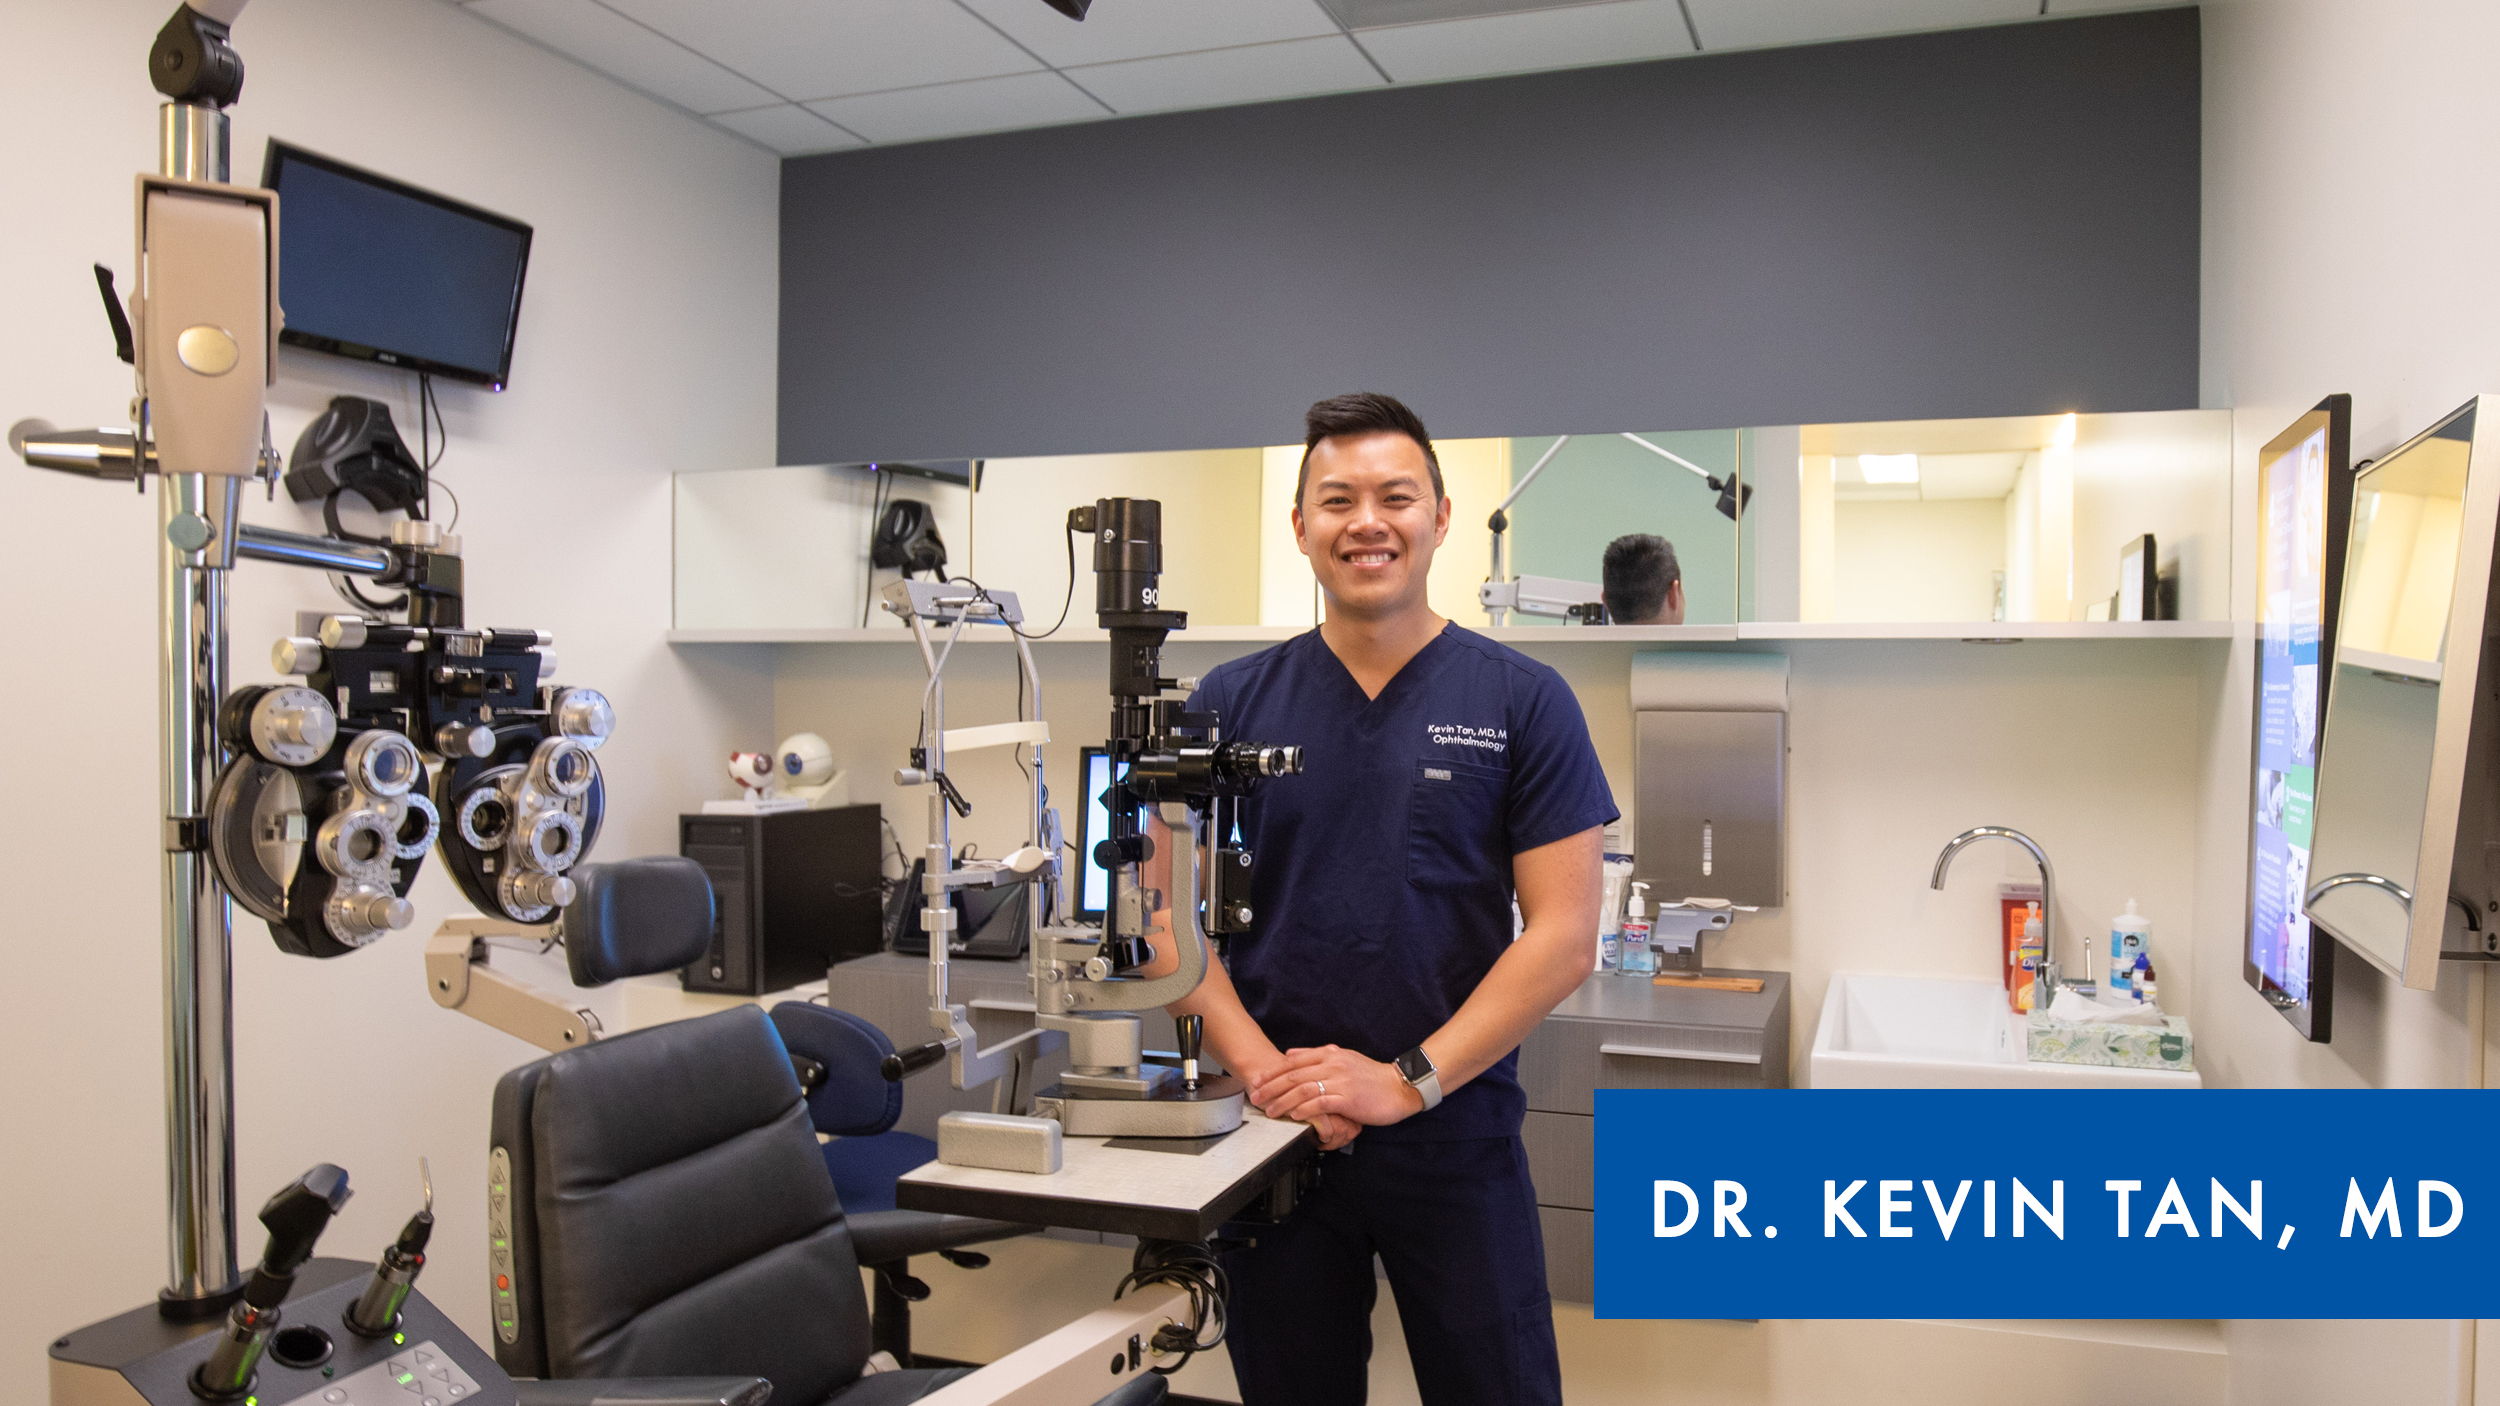 Dr. Kevin Tan, MD